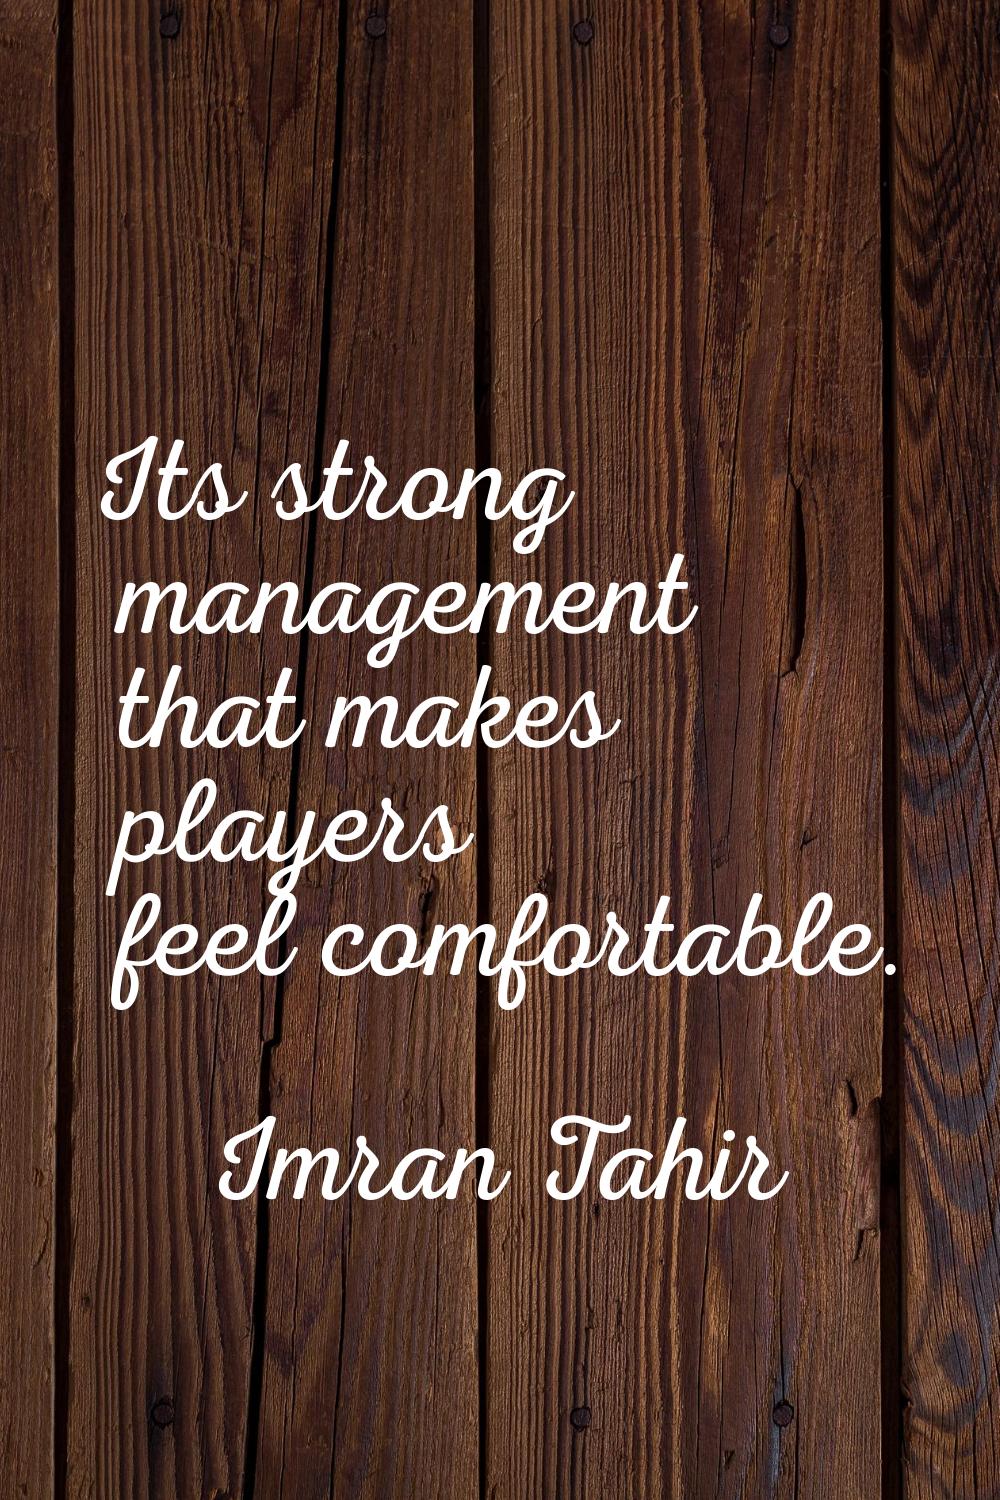 Its strong management that makes players feel comfortable.